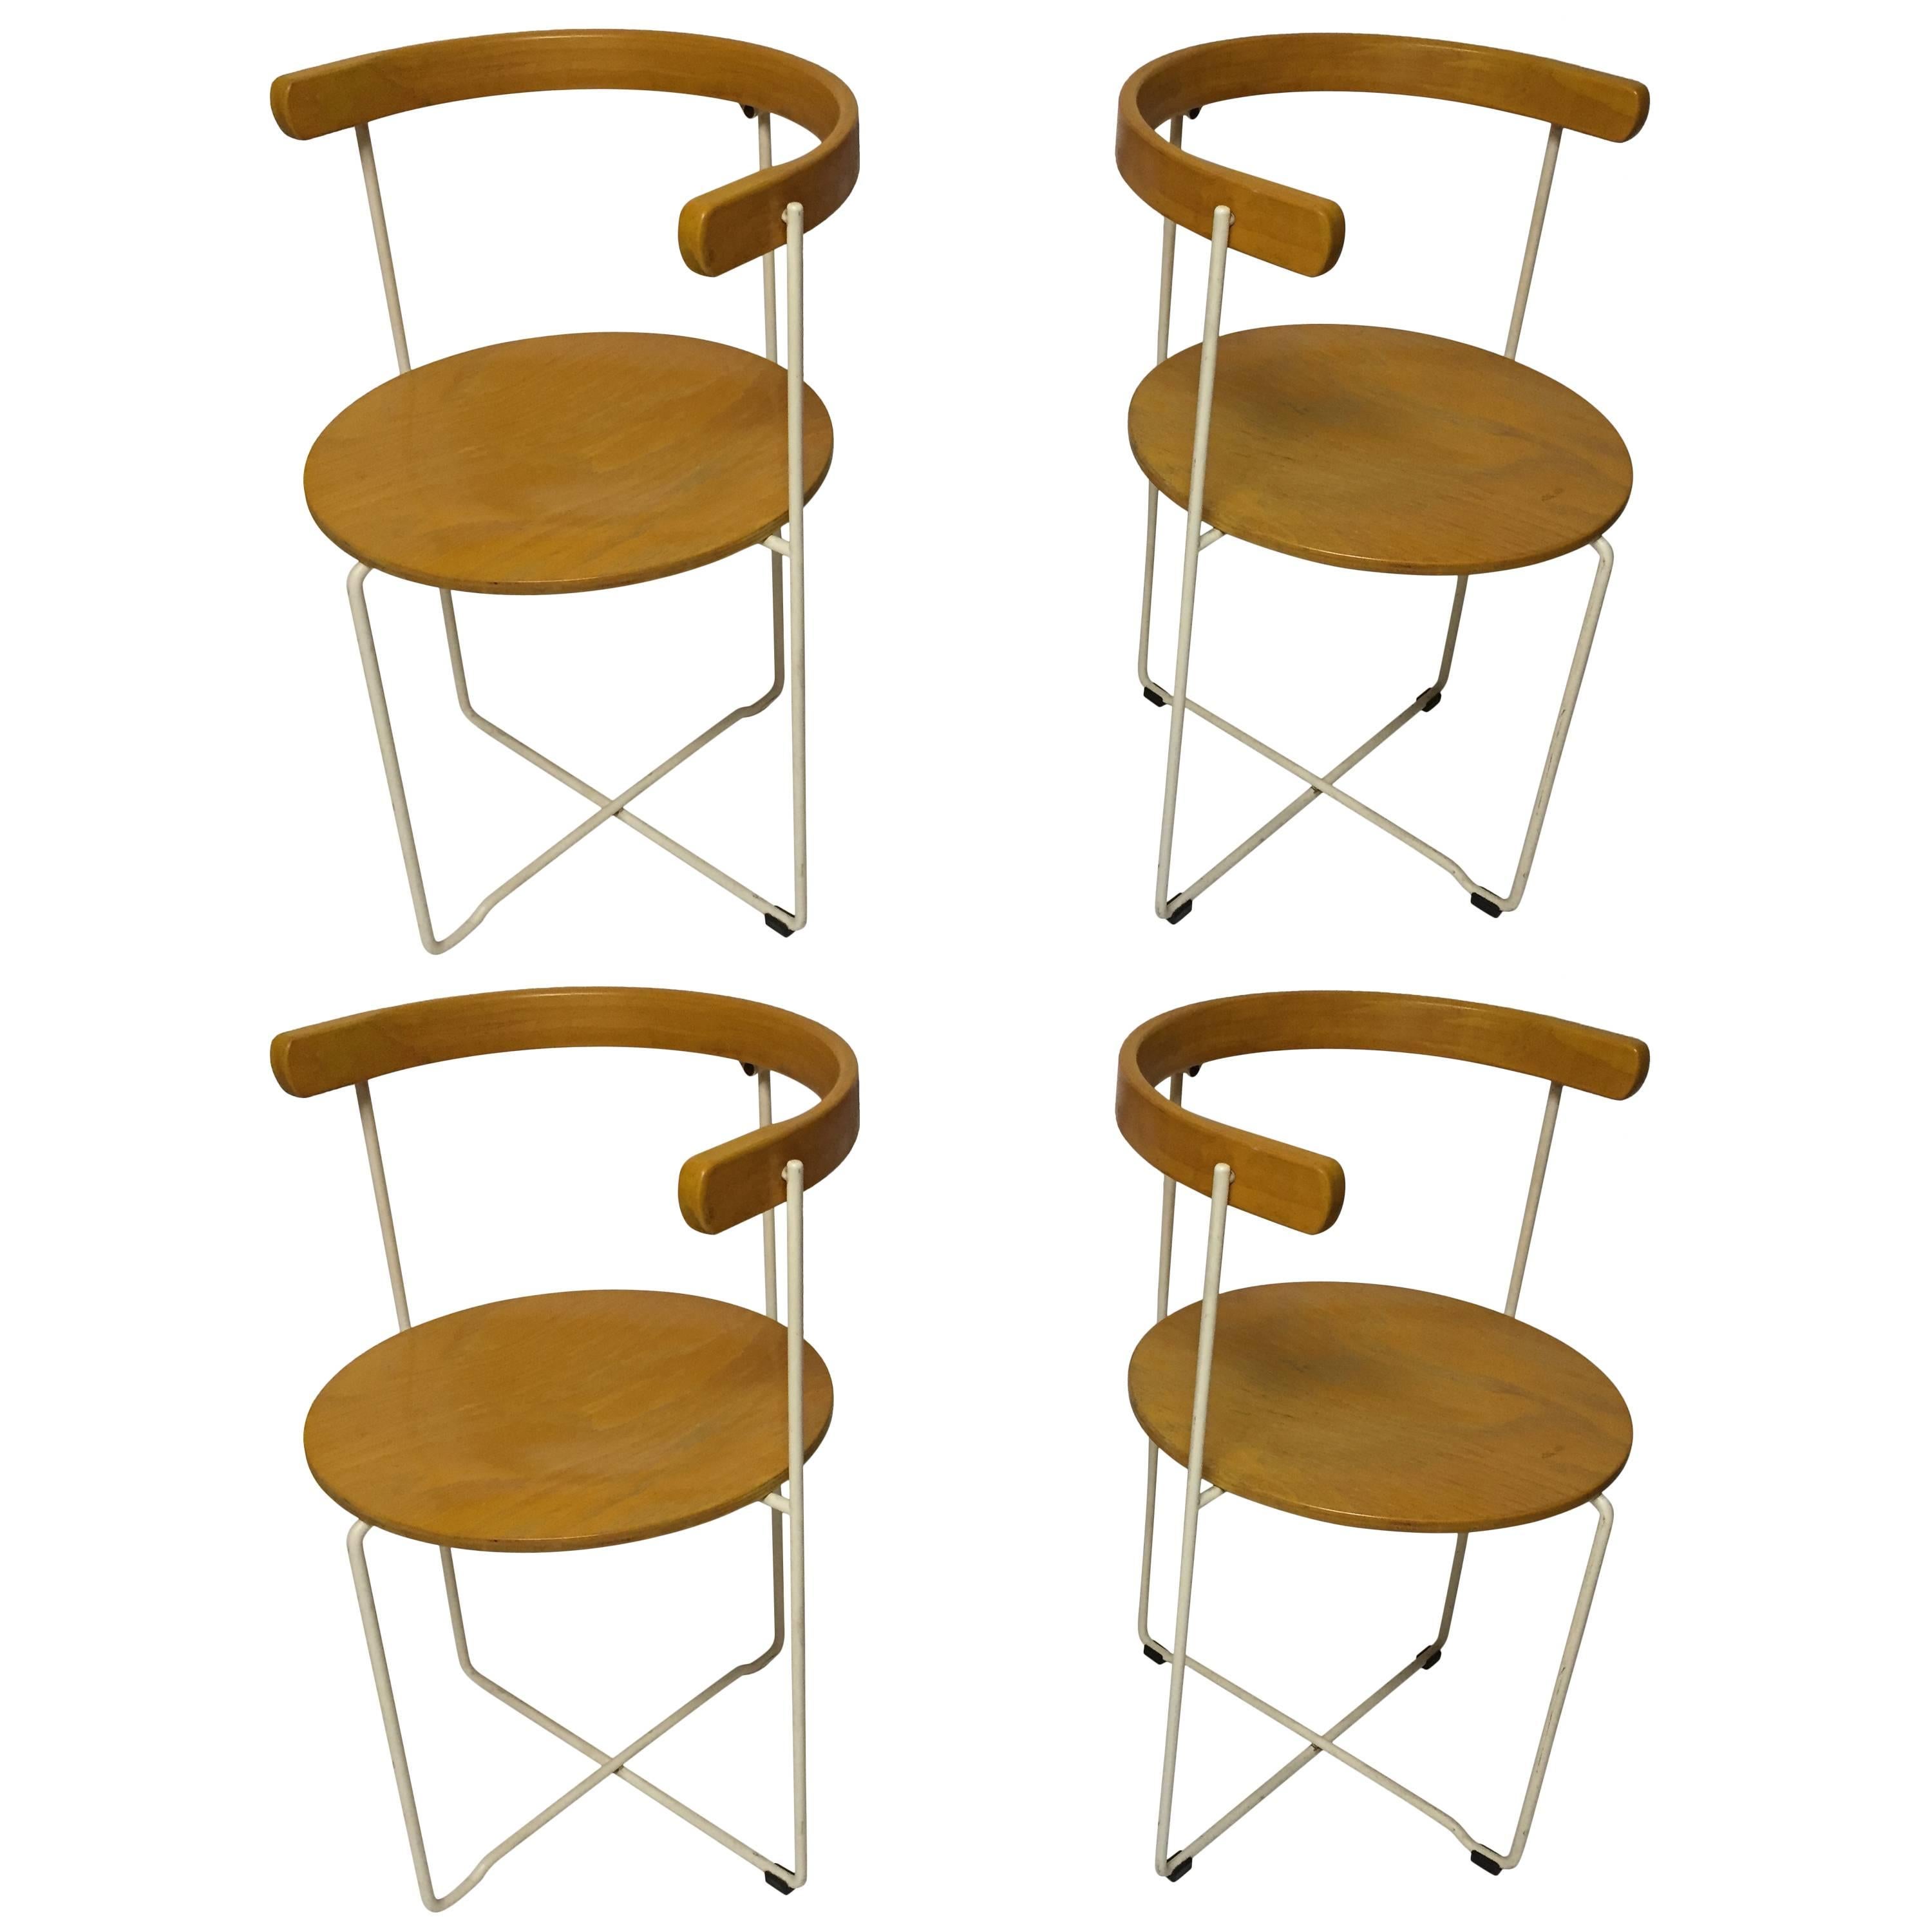 Set of Four 'Soley' Folding Chairs by Vladimir Hardarson